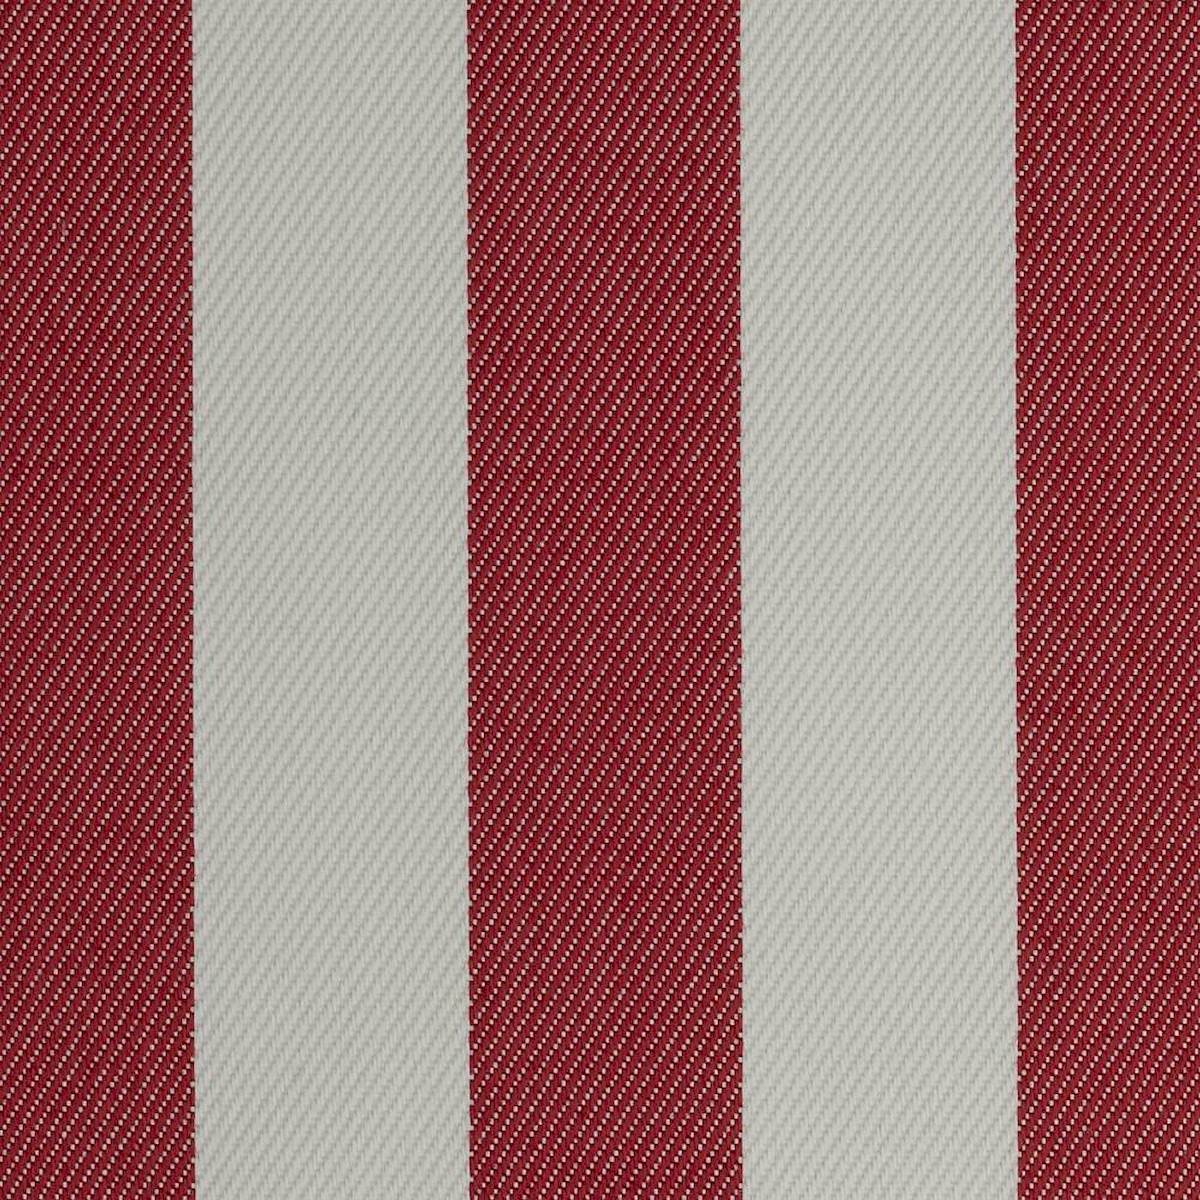 SUNSET STRIPES RED